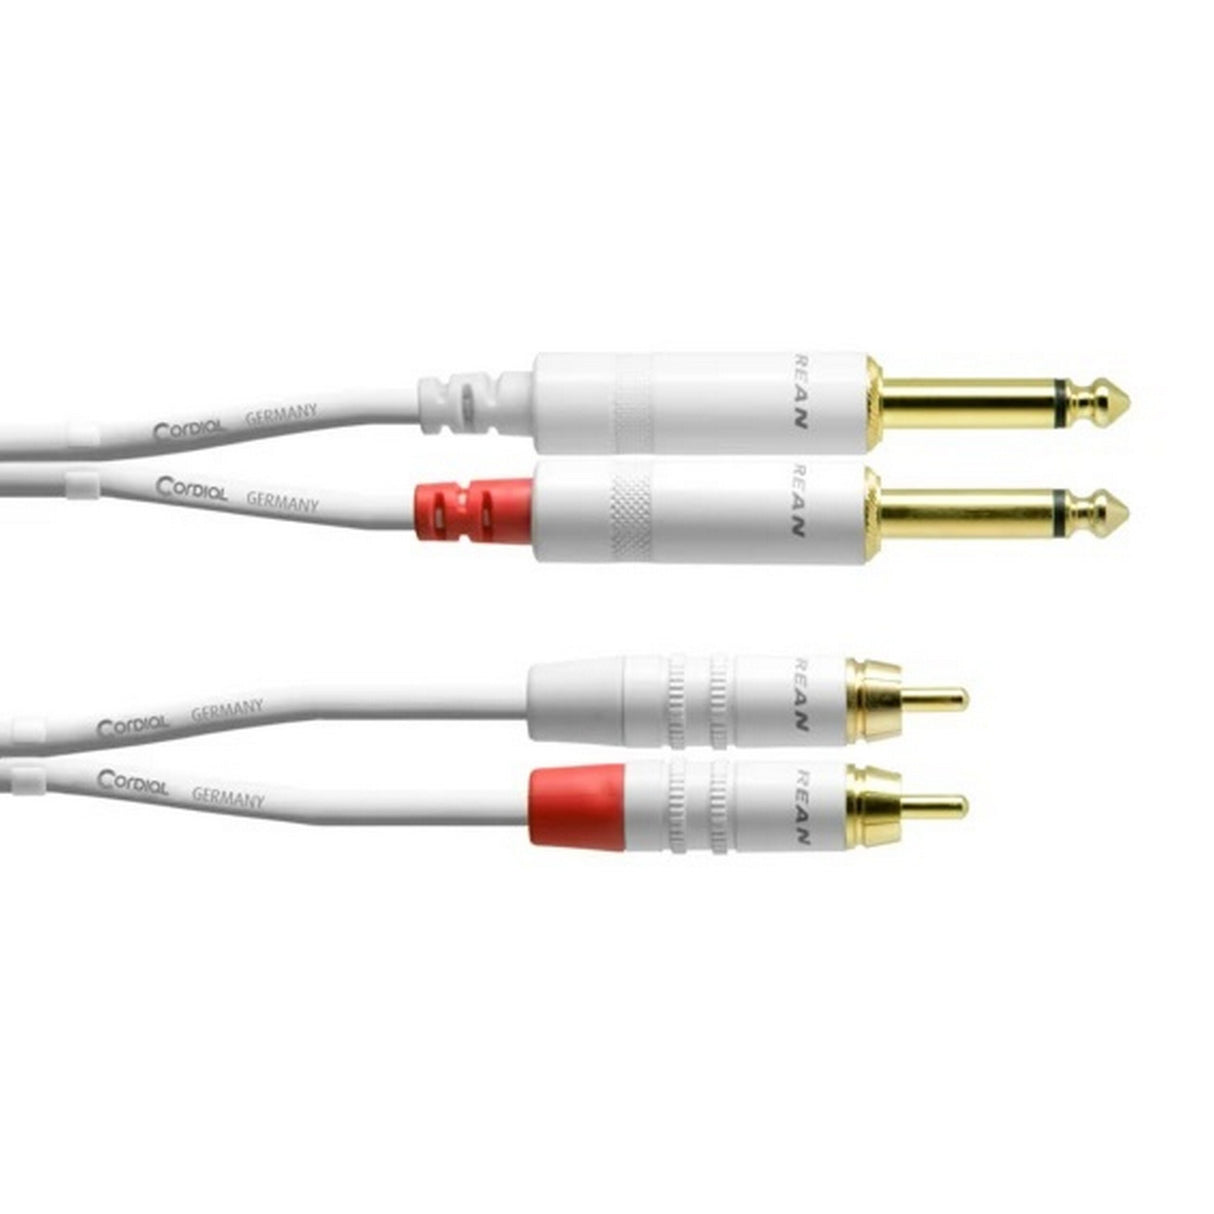 Cordial CFU 1.5 PC-SNOW 2 x 1/4-Inch to 2 x RCA Twin Cable/Adapter, White, 5-Feet